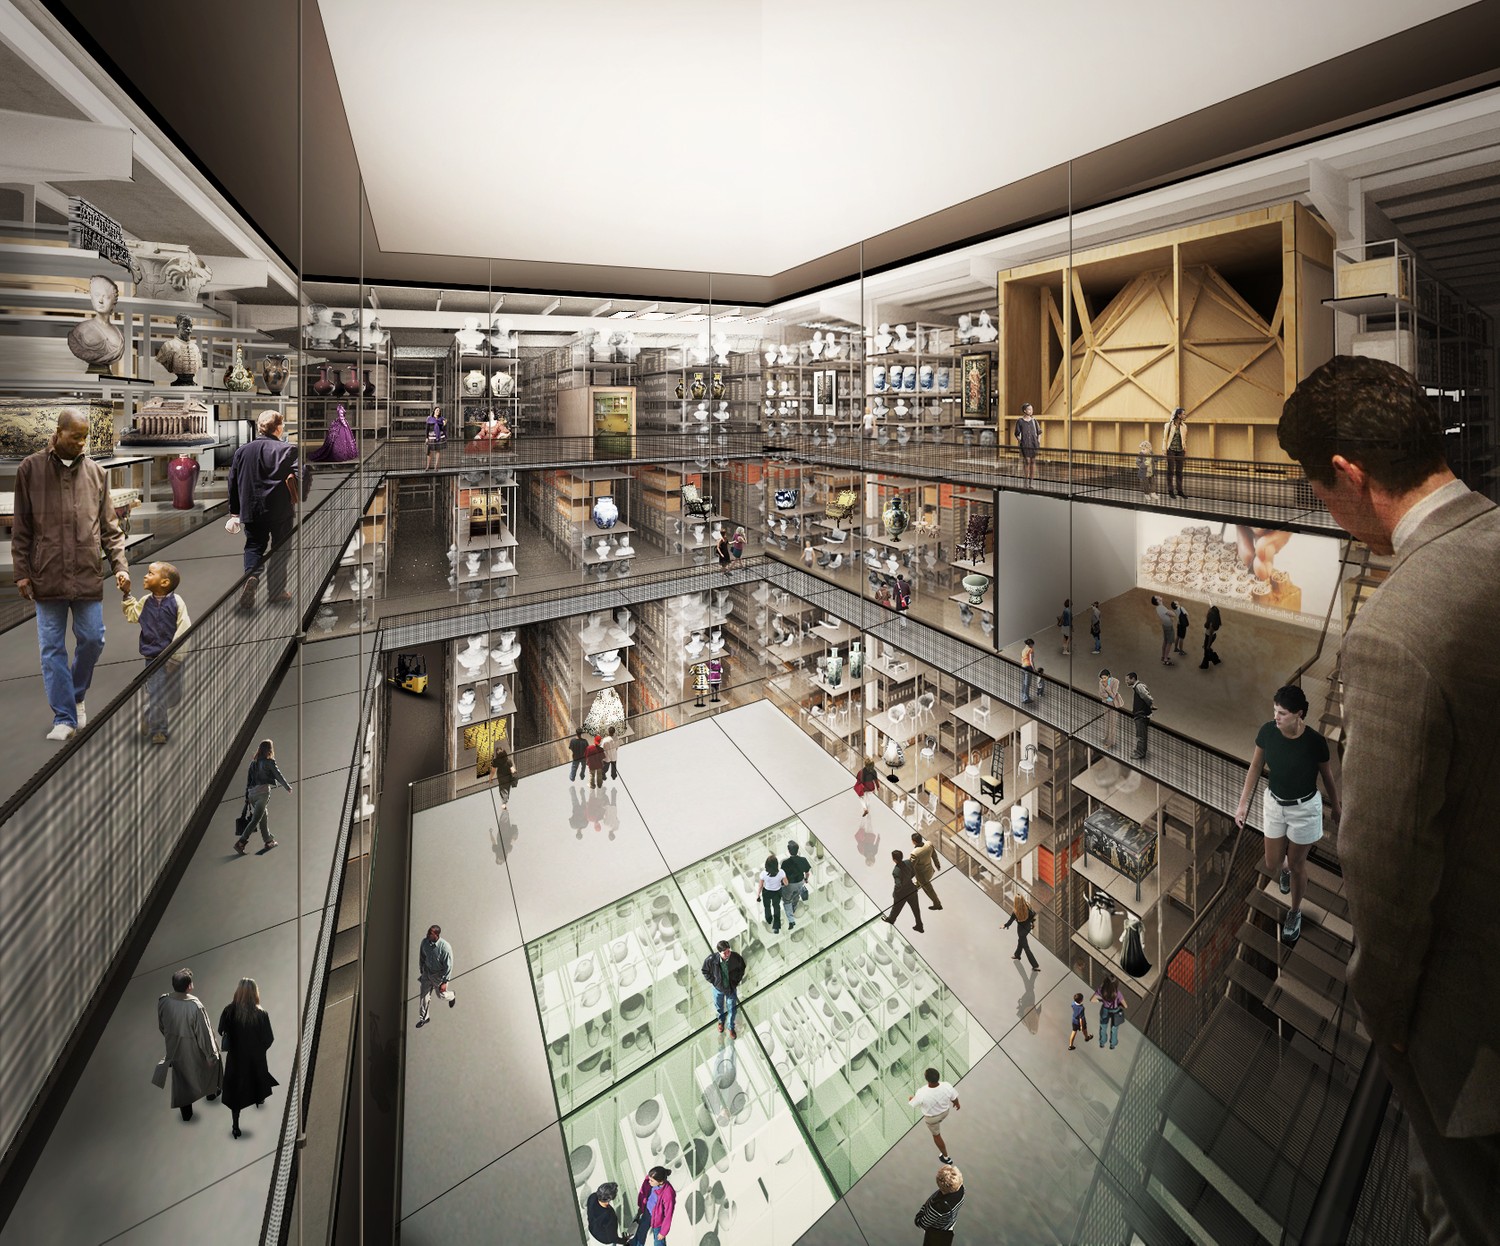 Renderings for the V&A's Here East by Diller Scofidio + Renfro. Image courtesy of the architects